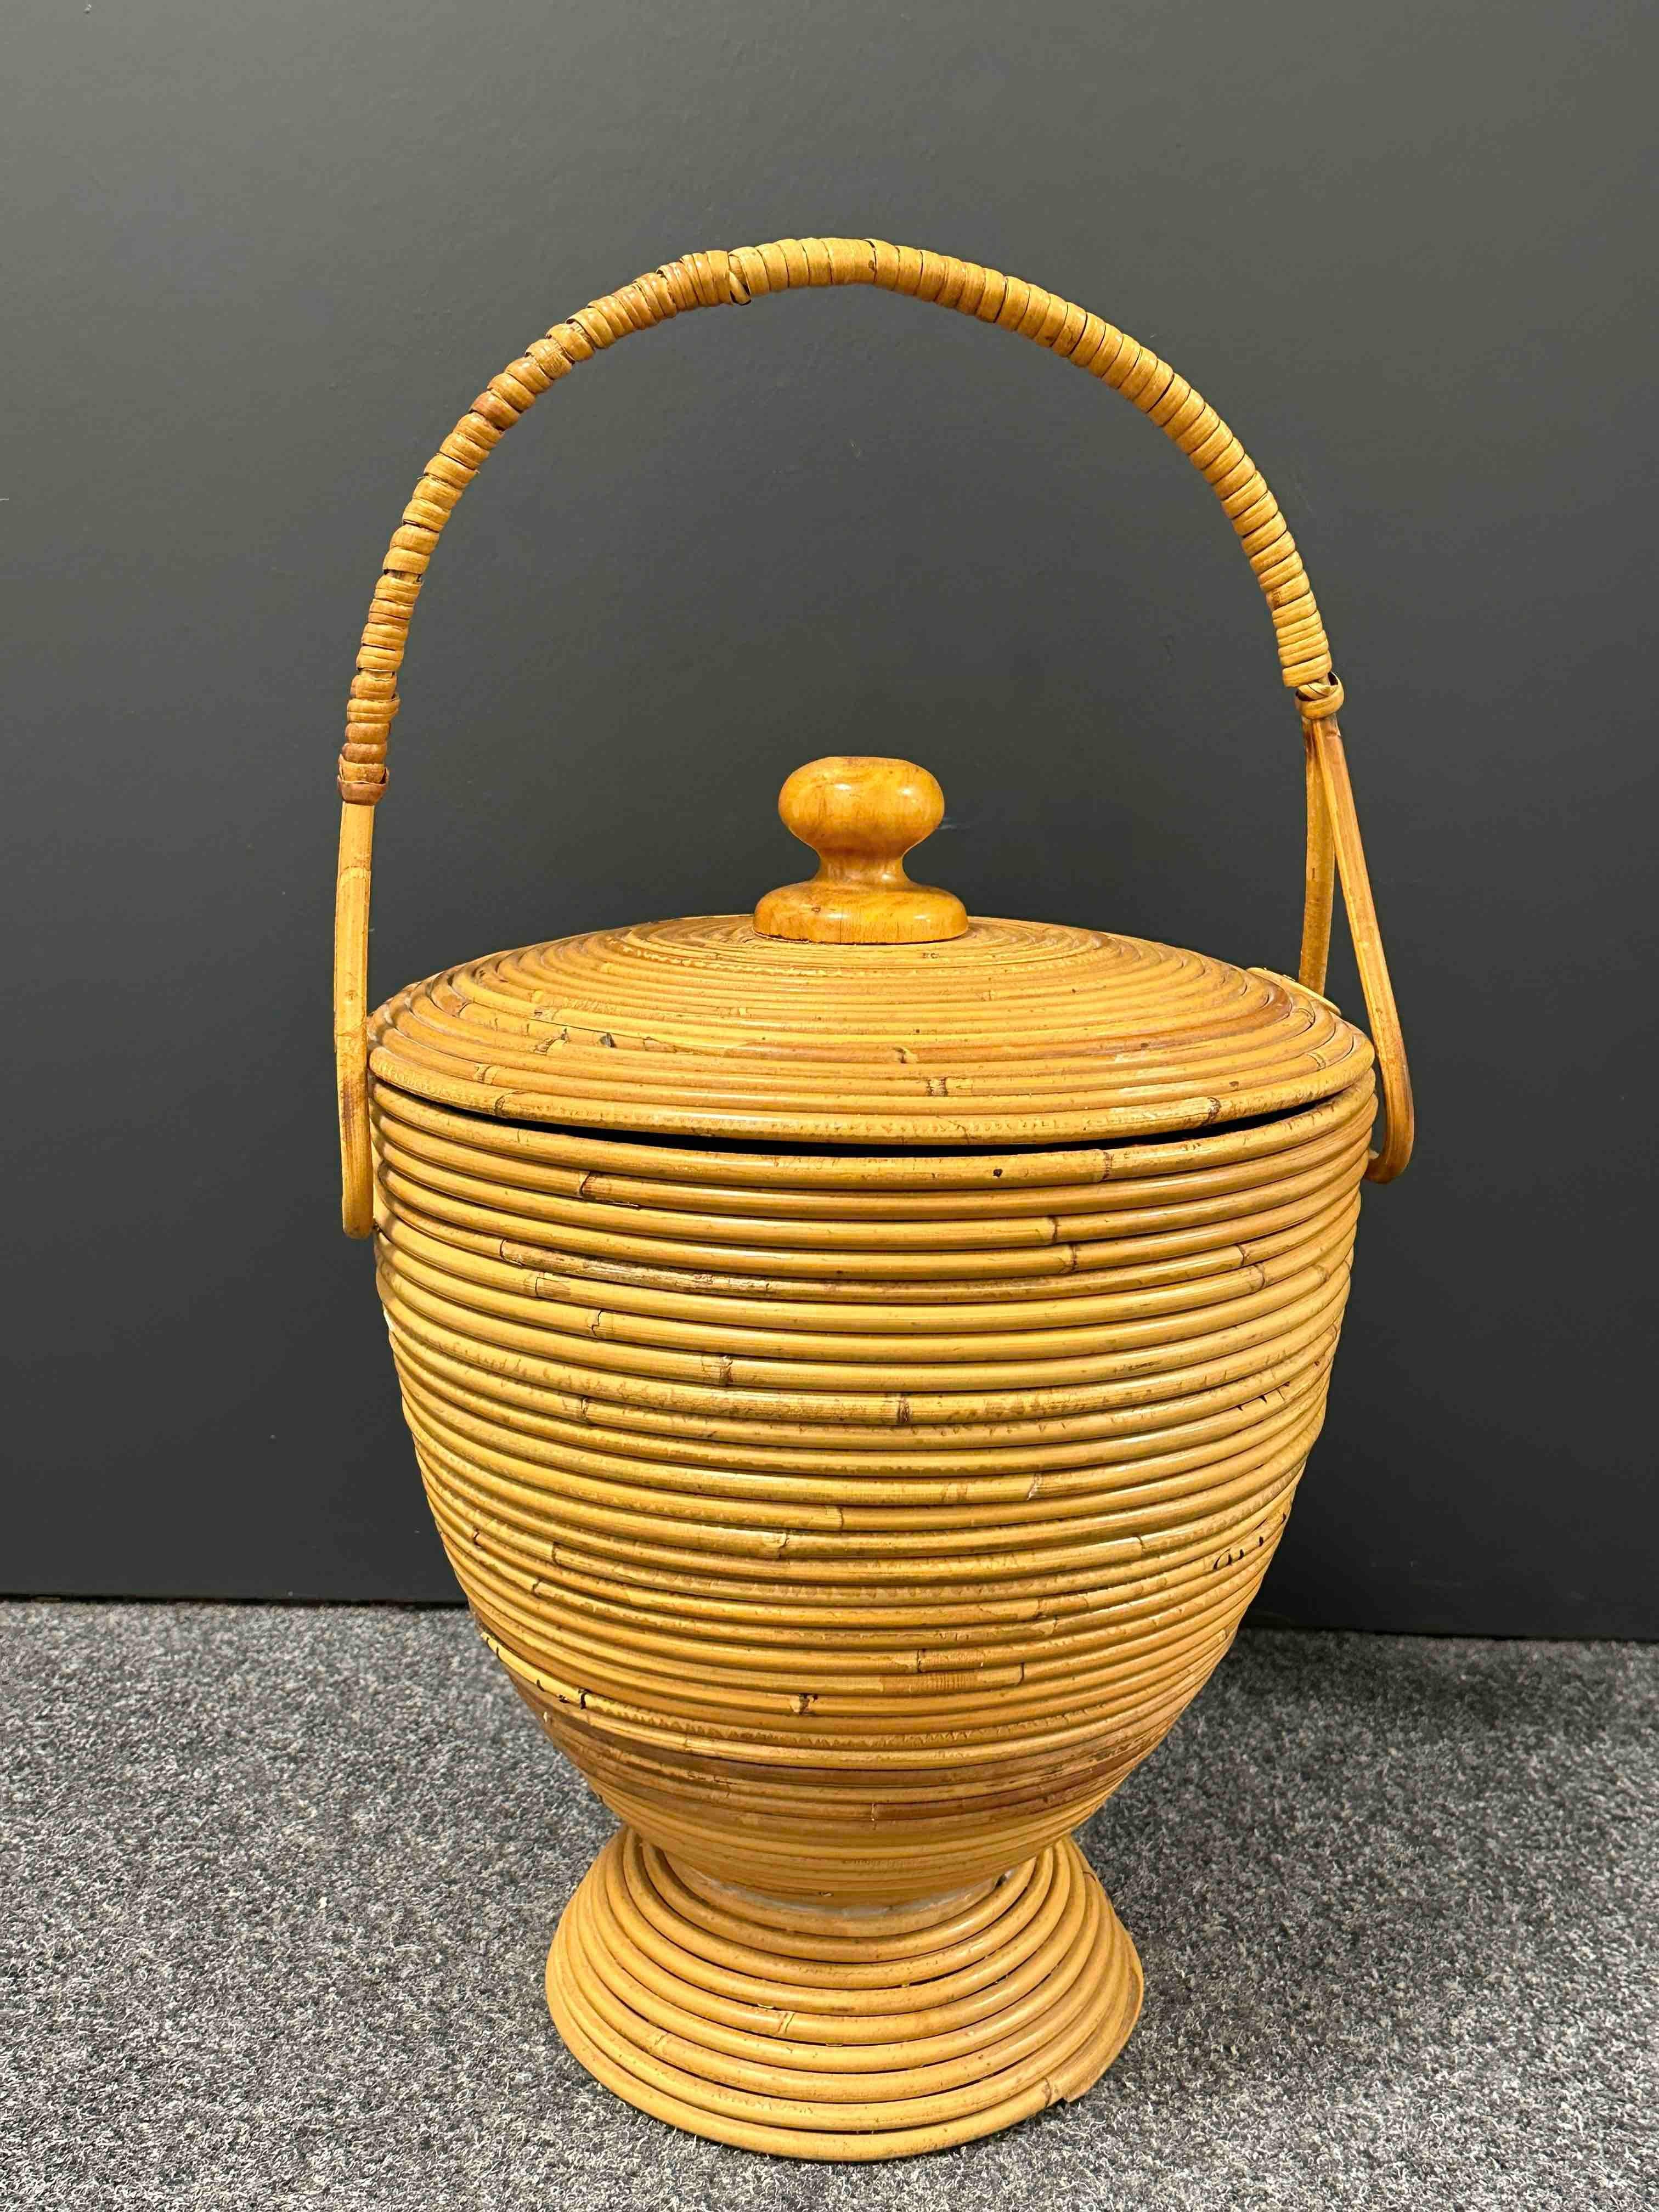 Offered is an absolutely stunning, 1970s Italian decorative basket or catchall. Original midcentury era. Minor patina gives this piece a classy statement. Attributed to Vivai Del Sud, fount at an Estate sale in Modena, Italy.